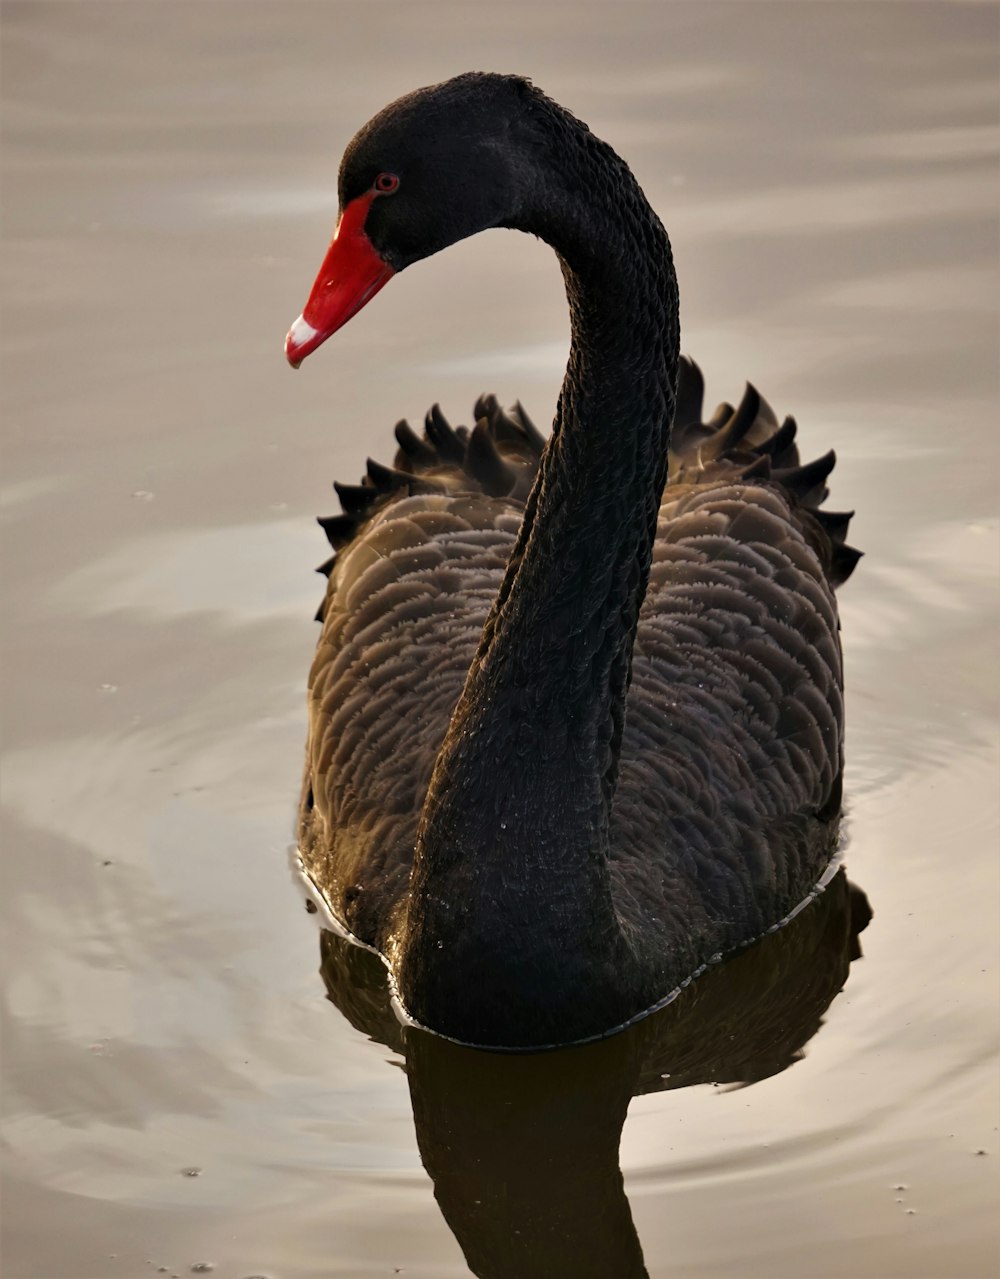 Overfrakke Monograph Nysgerrighed black and gray swan in water photo – Free Rodley Image on Unsplash